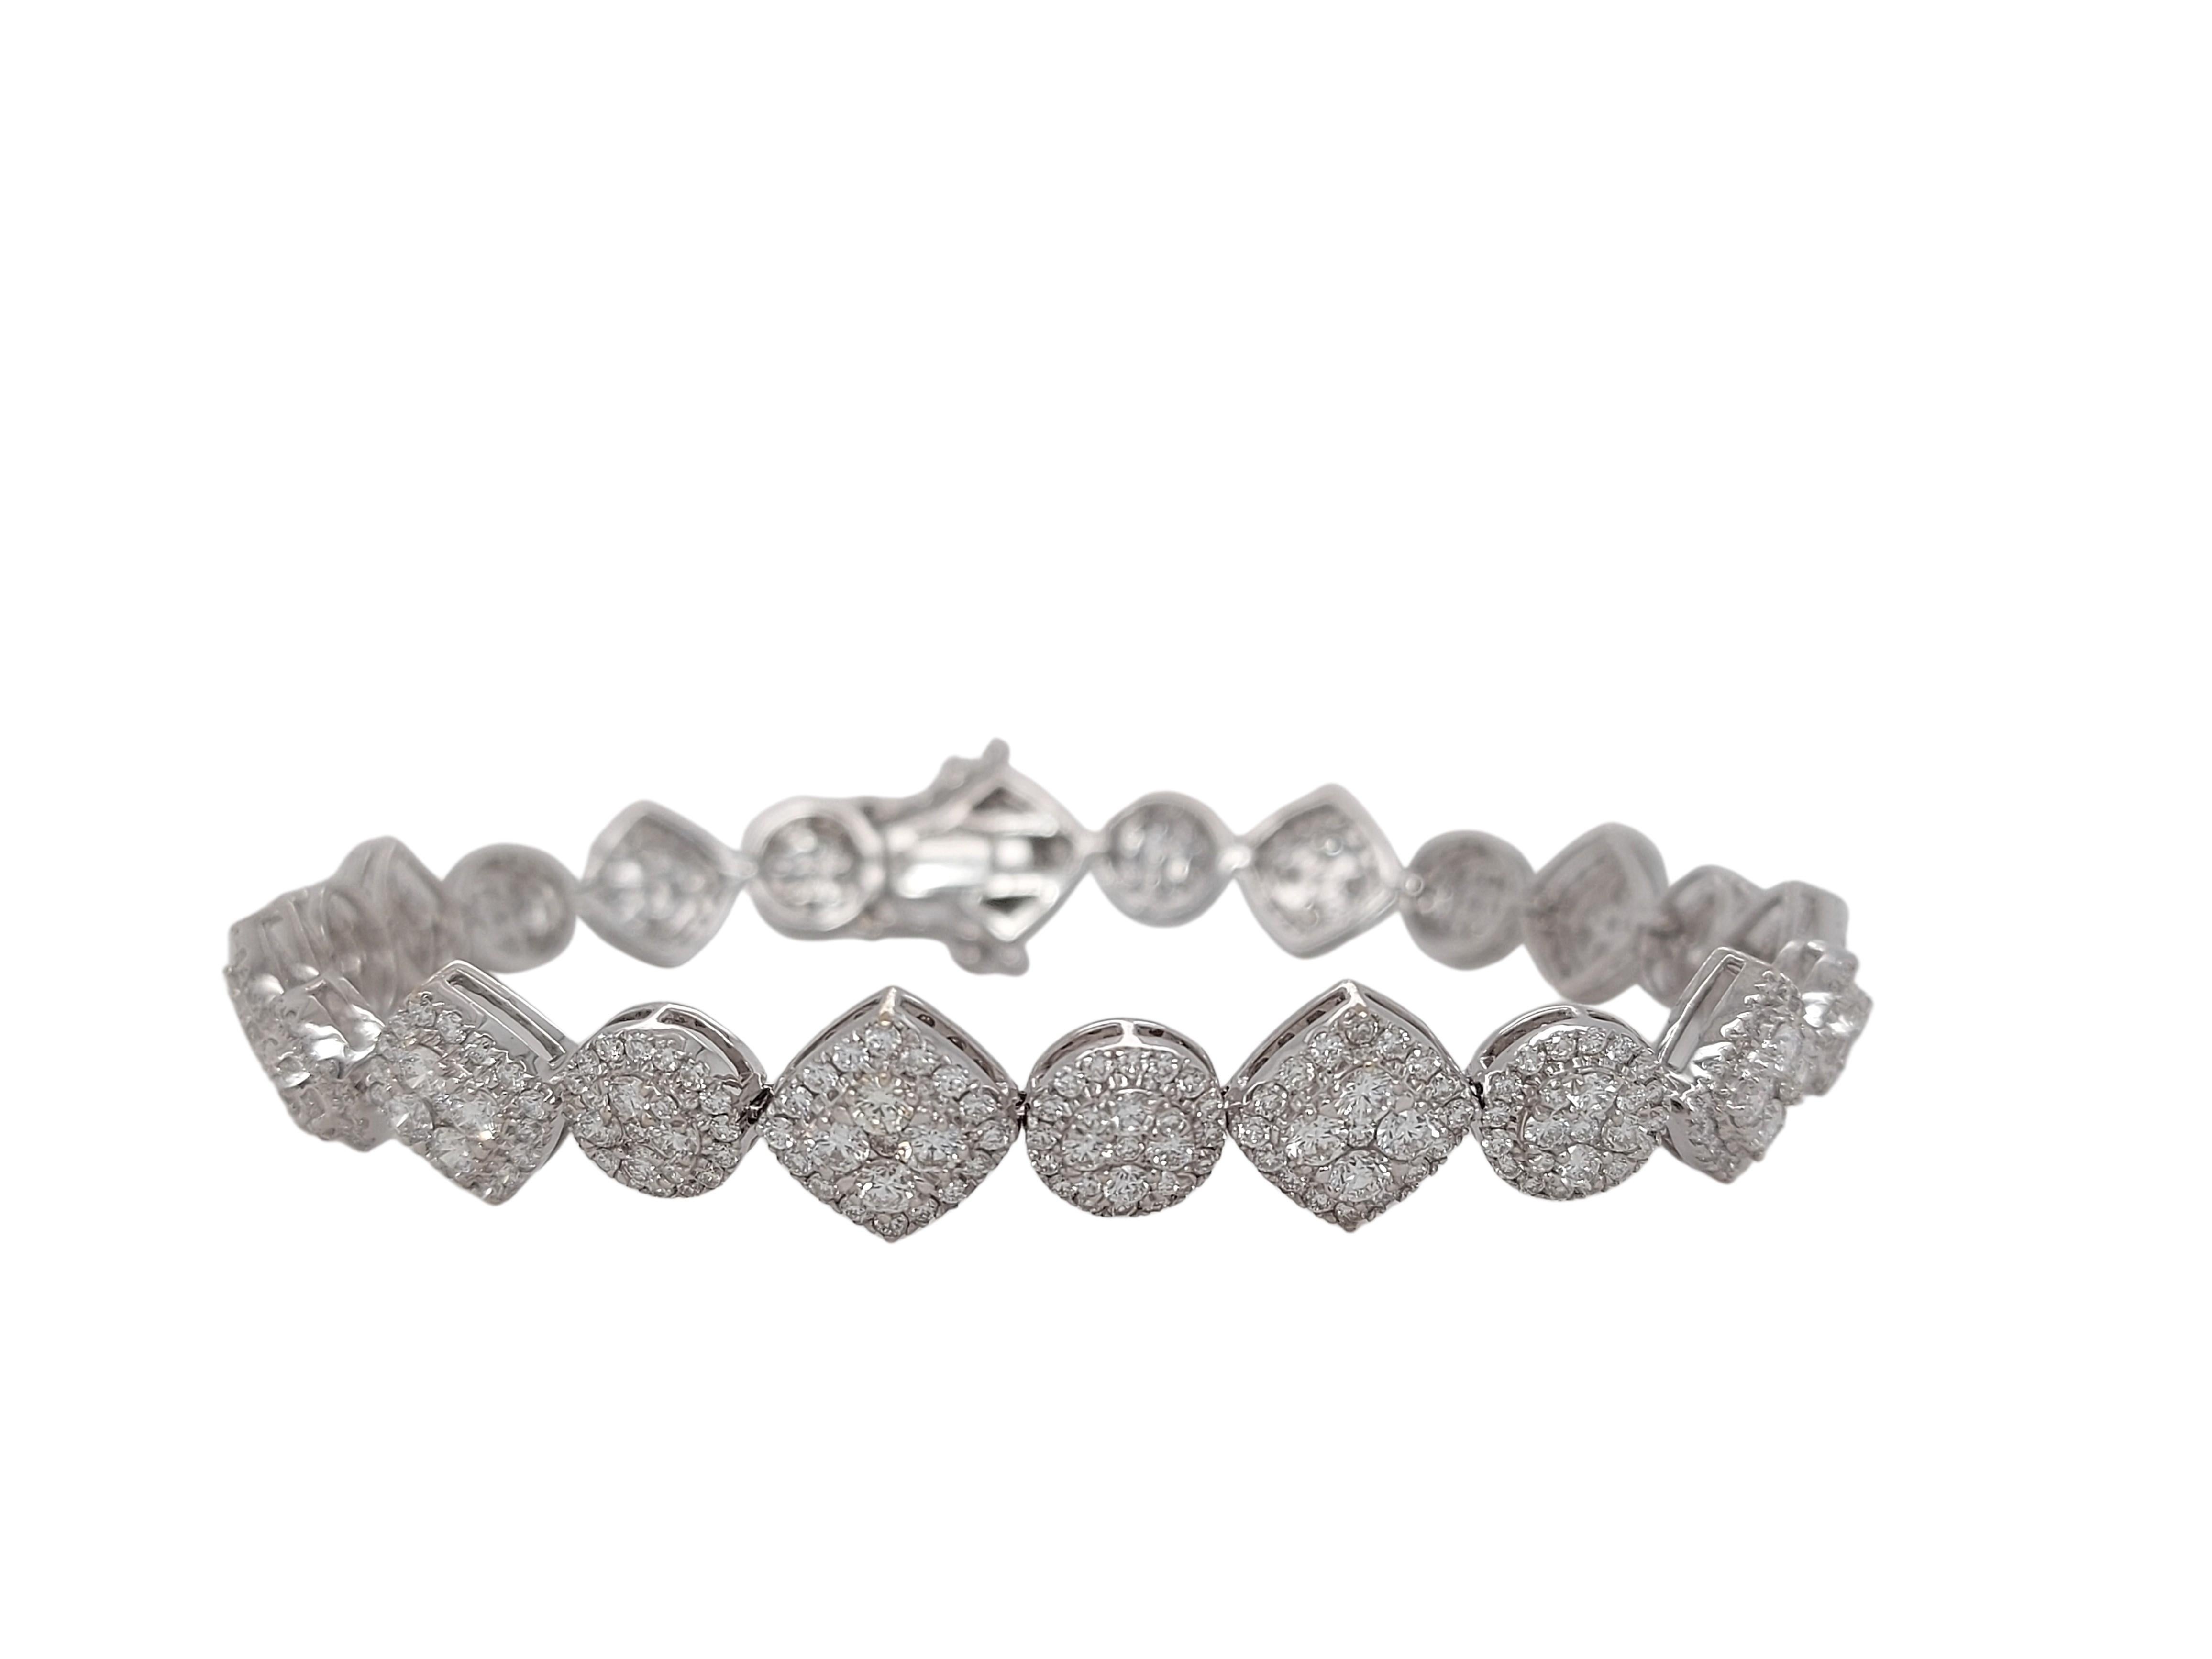 18kt White Gold Tennis Diamond Bracelet, Can be purchased with the same beautiful Tennis necklace LU1752212218482

Diamonds: 506 brilliant cut diamonds together 5.48ct G.H VS/SI

Material: 18kt white gold

Total weight: 20.1 gram / 0.710 oz / 13.0